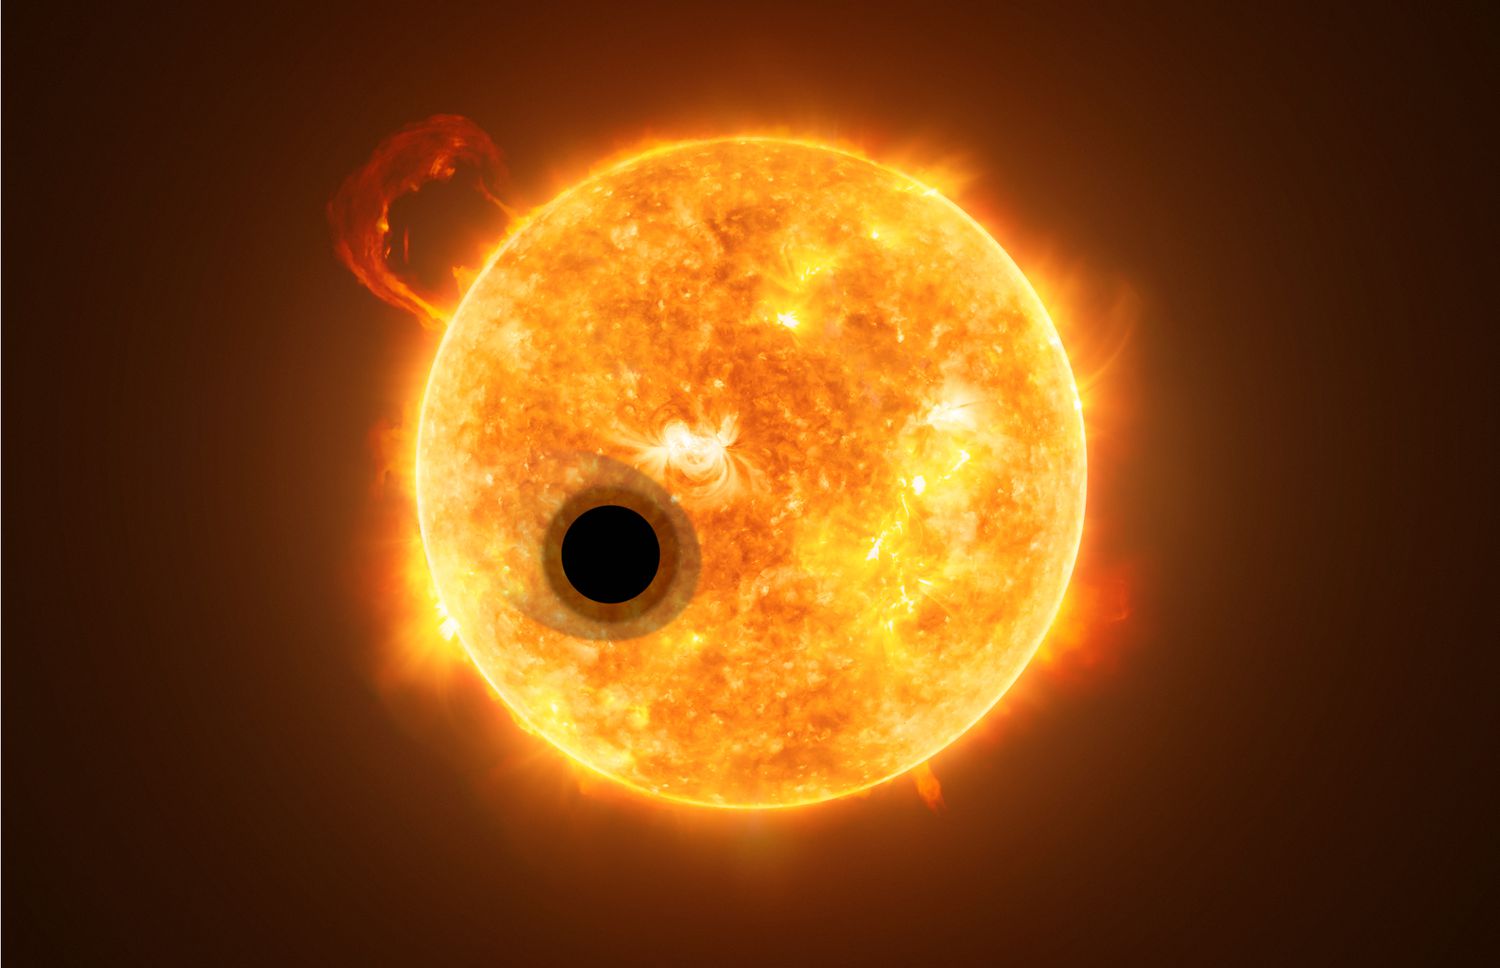 view of WASP-107b "super-puff" planet